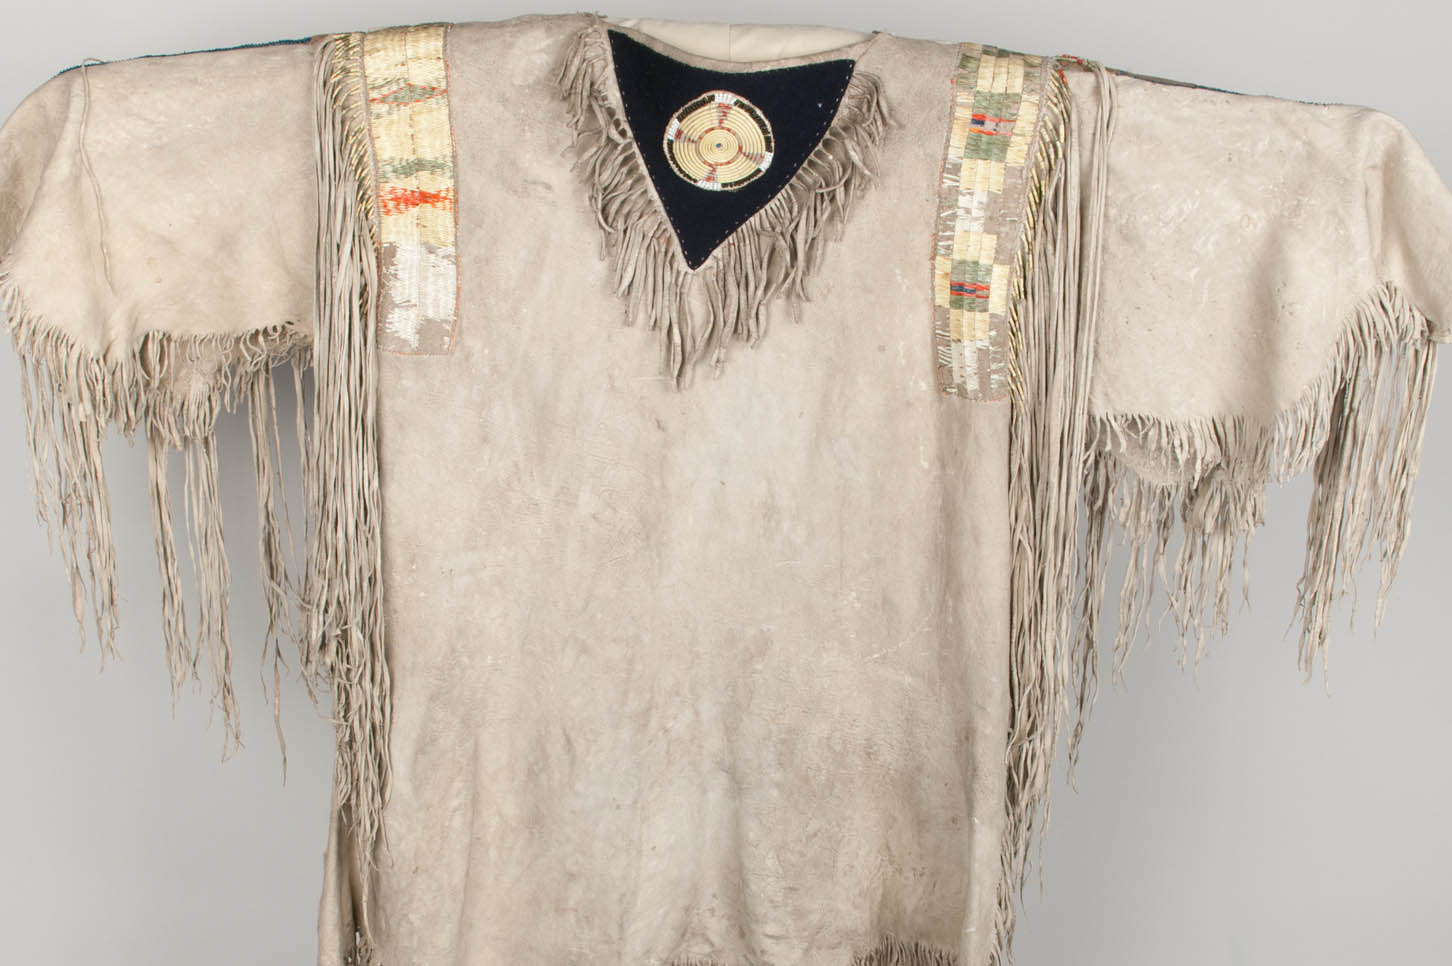 Men's ceremonial shirt, constructed out of at least 3 hides for the body of the shirt and more hides for the fringe. The neckflaps retain the original form of the animal's neck, which is decorated with a rosette of single bundle, quill-wrapped horsehair